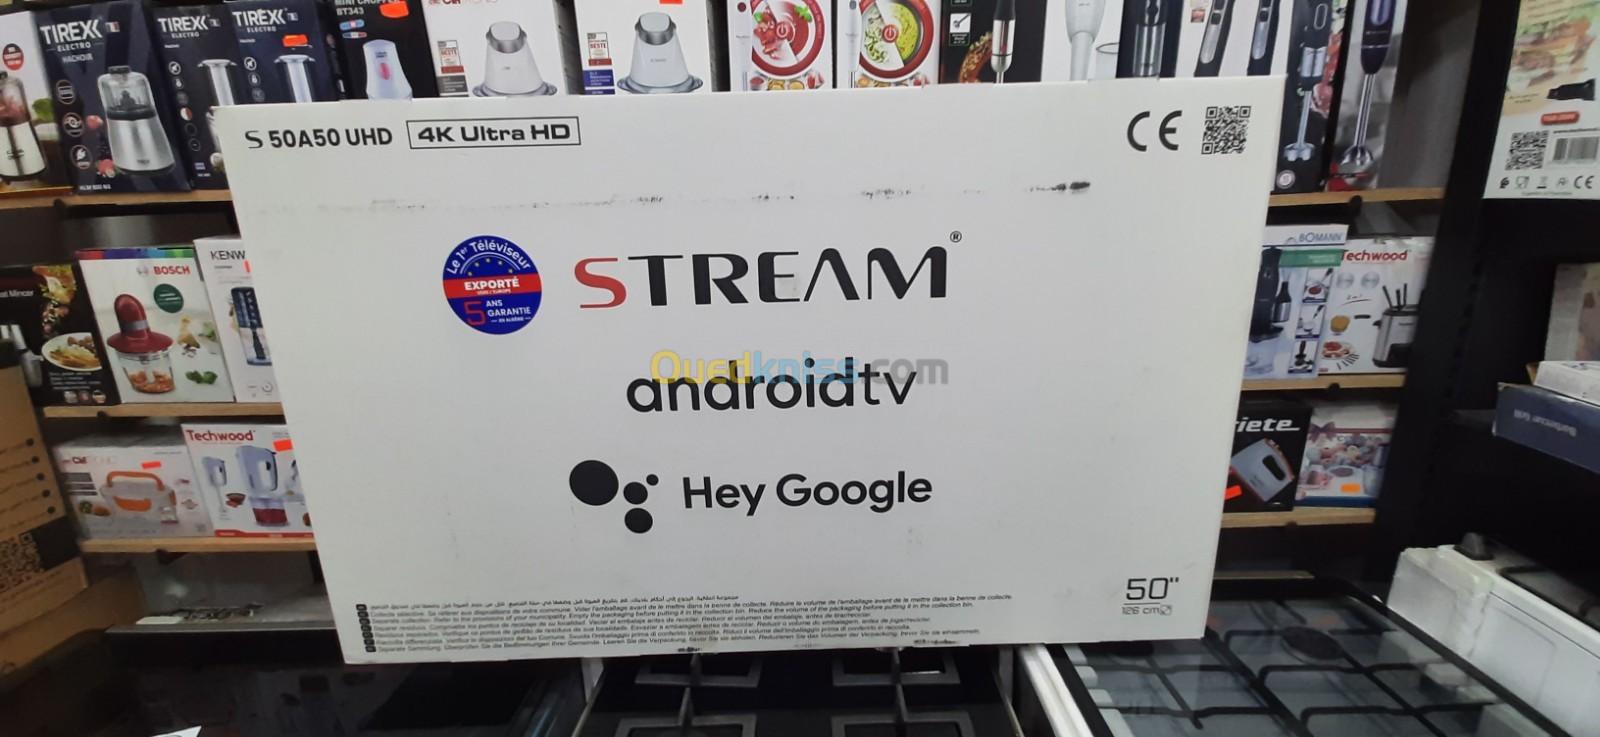 BOOM PROMOTION STREAM 50 ANDROID 4K UHD HDR 10